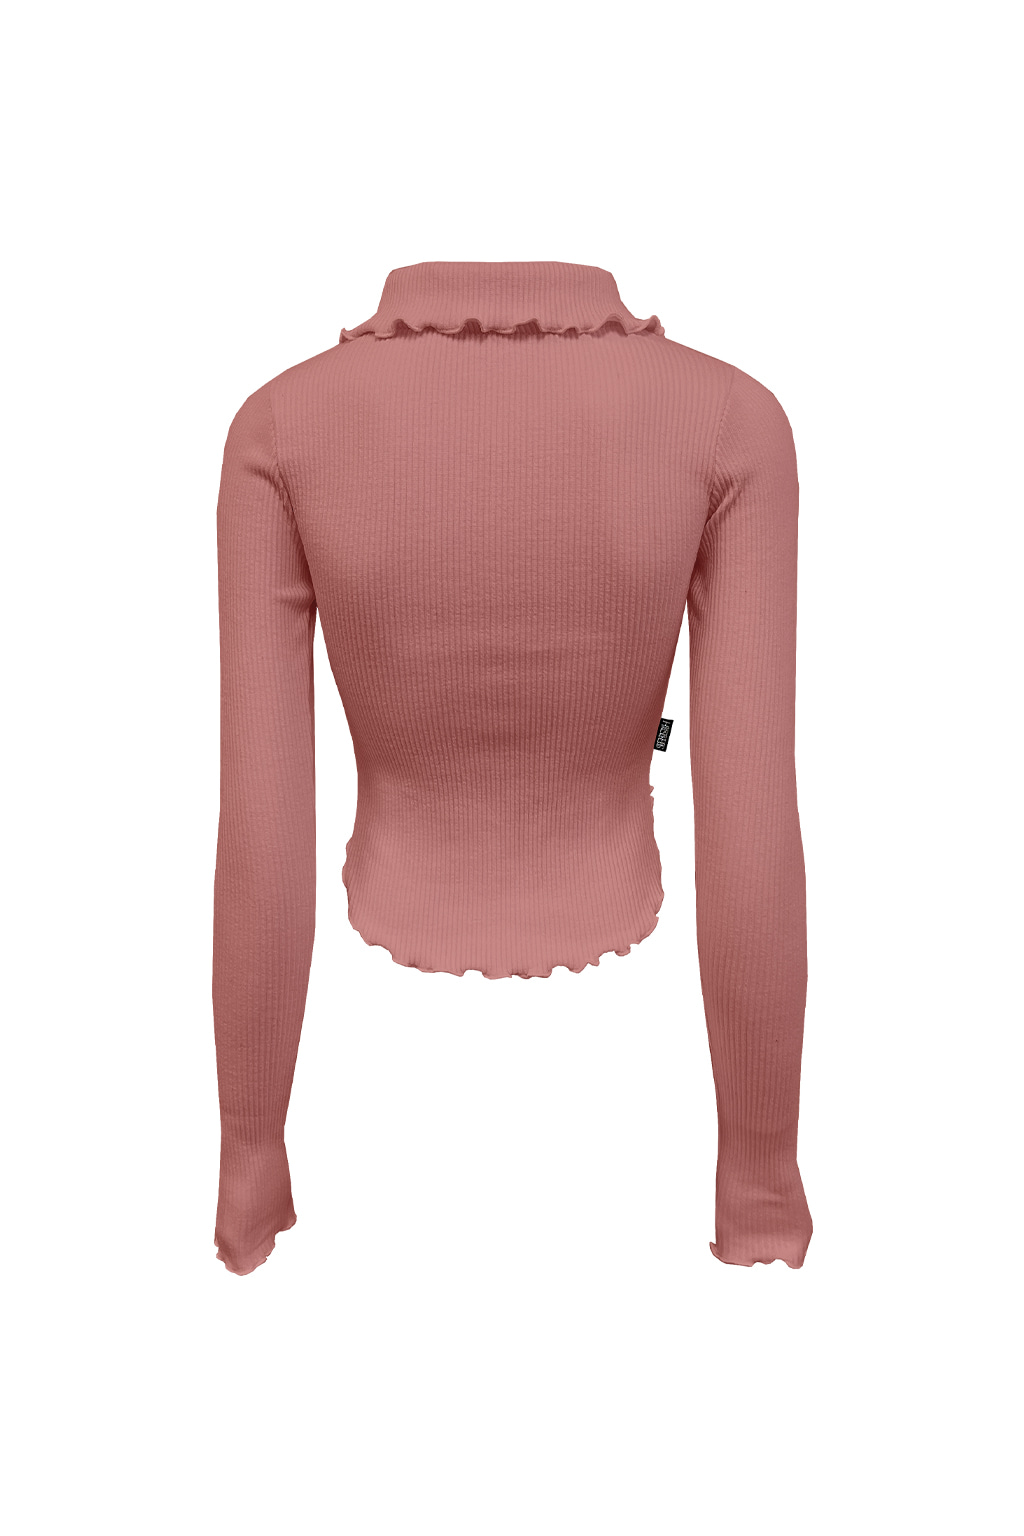 Ribbed Tension Two Way Glamour Zip Up Indie Pink